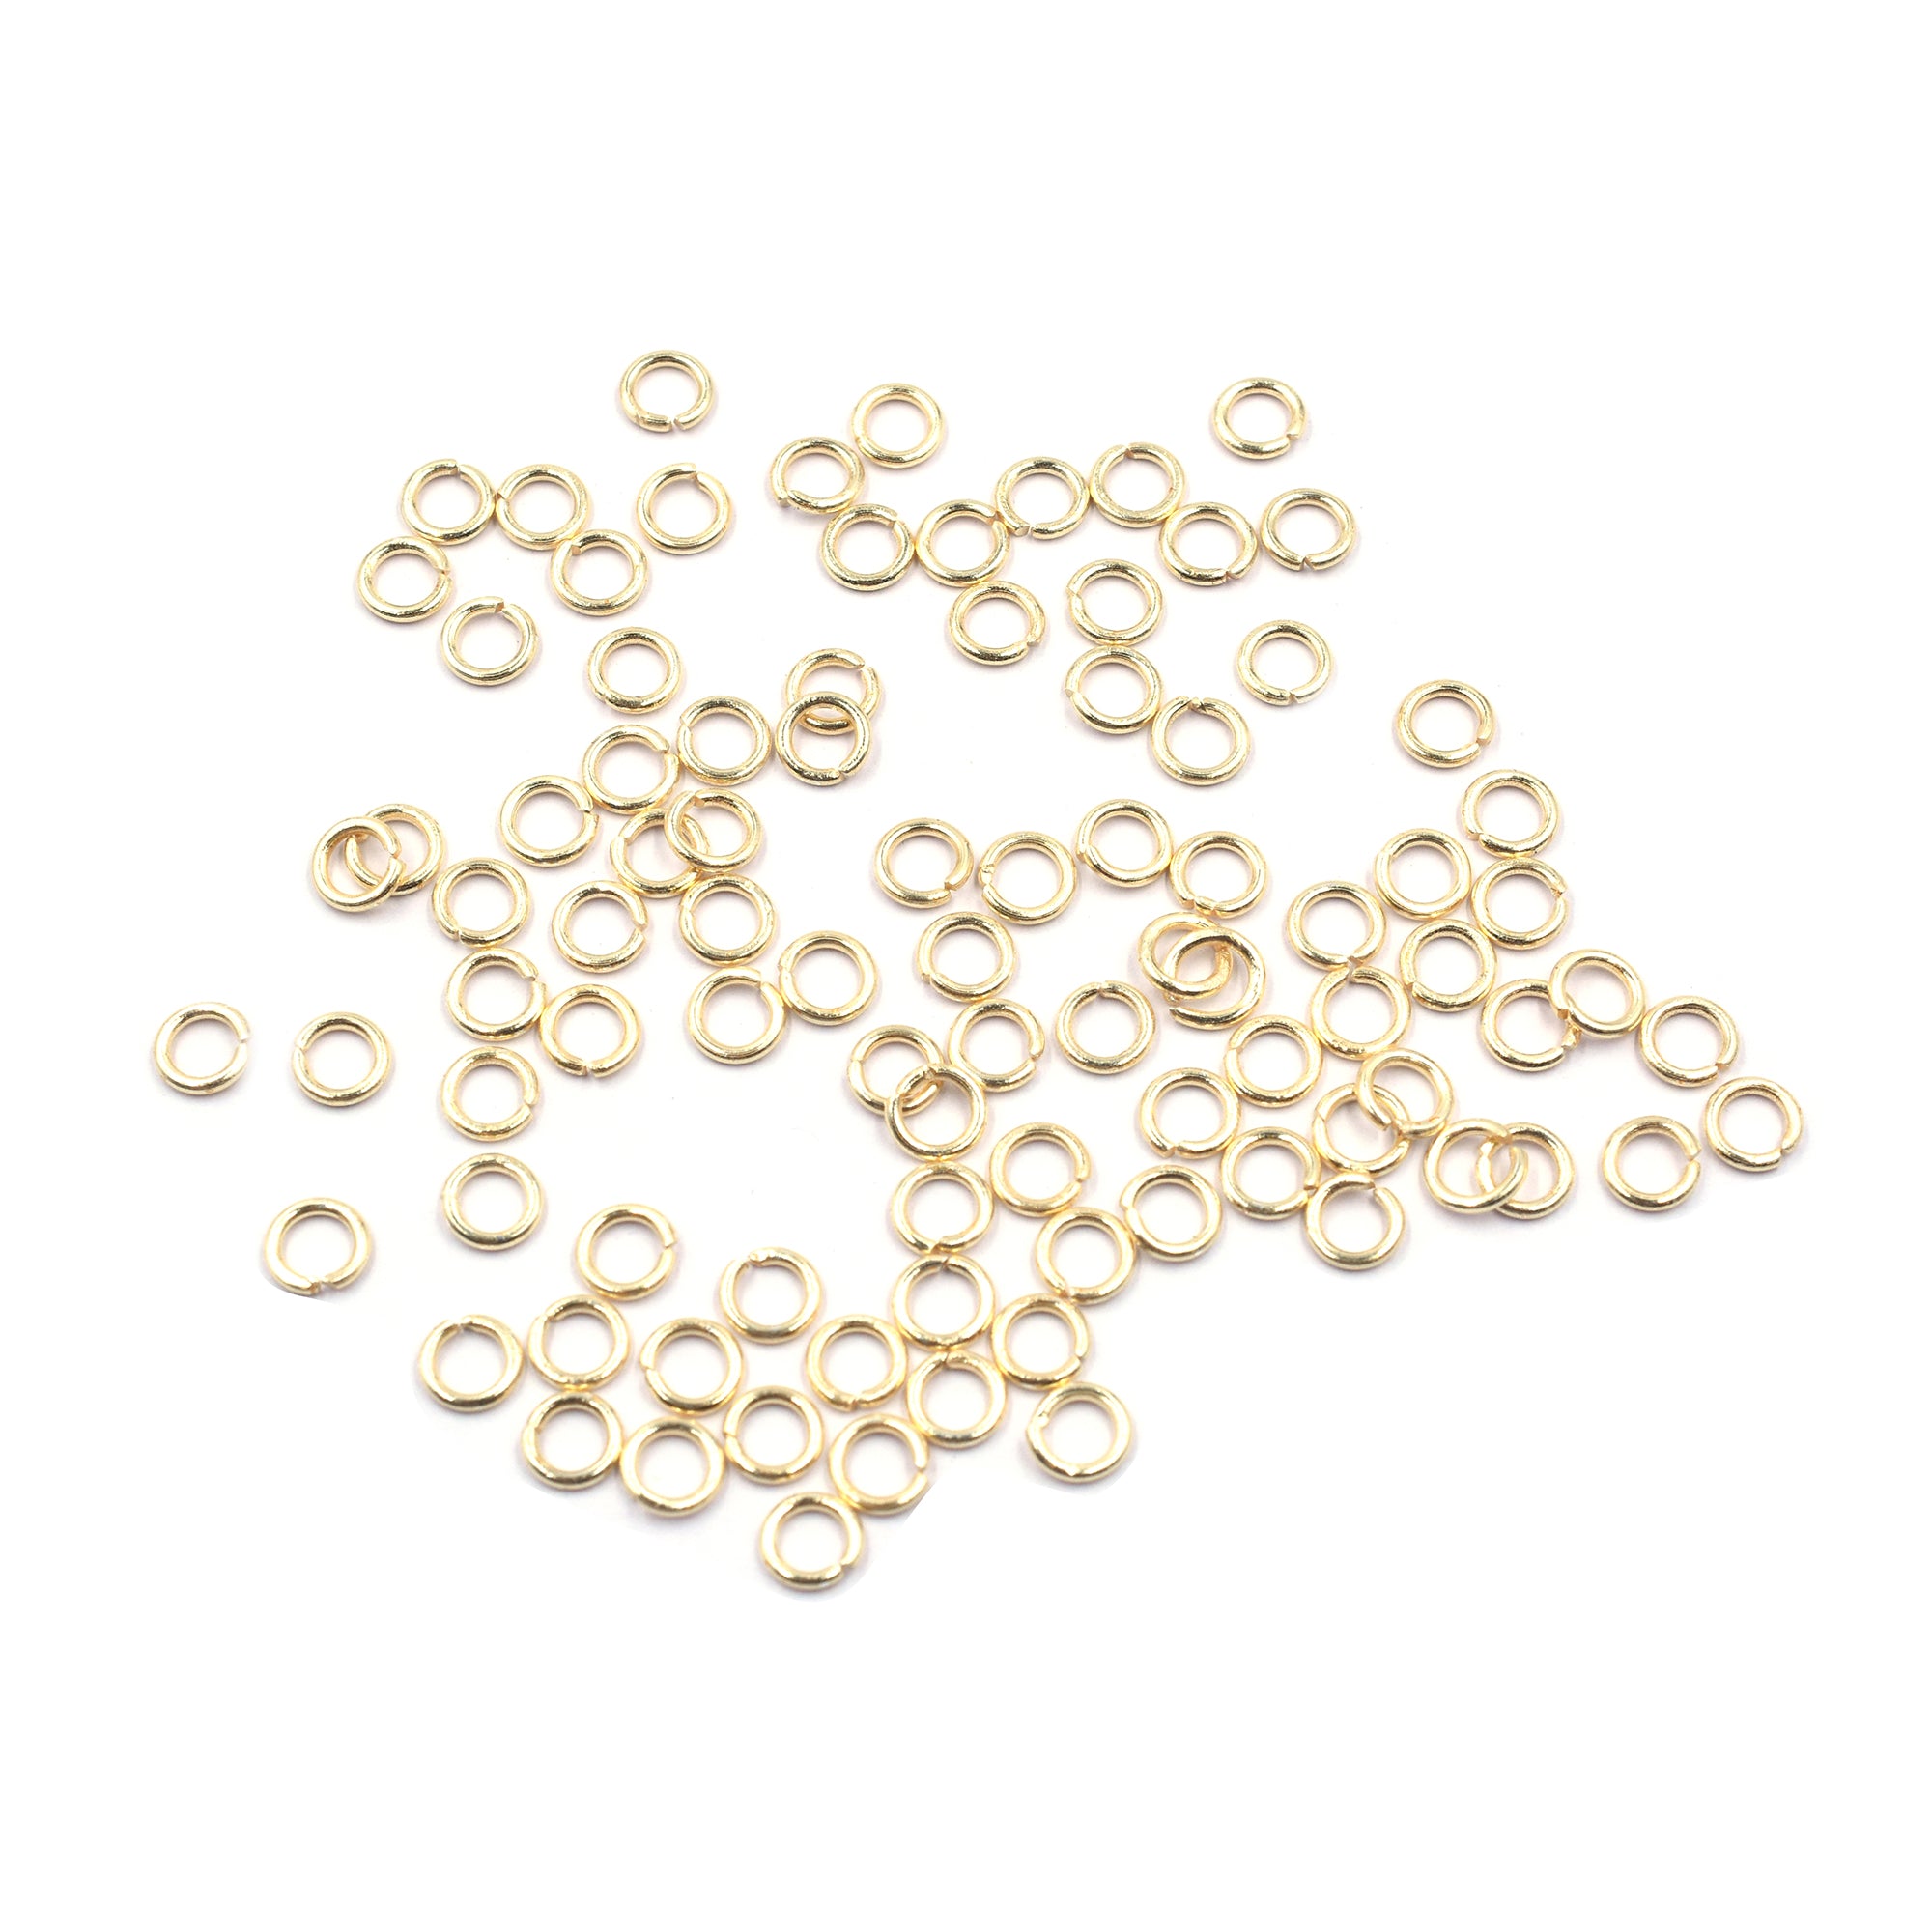 500 Pcs 6mm Open Jump Ring Gold Plated Copper